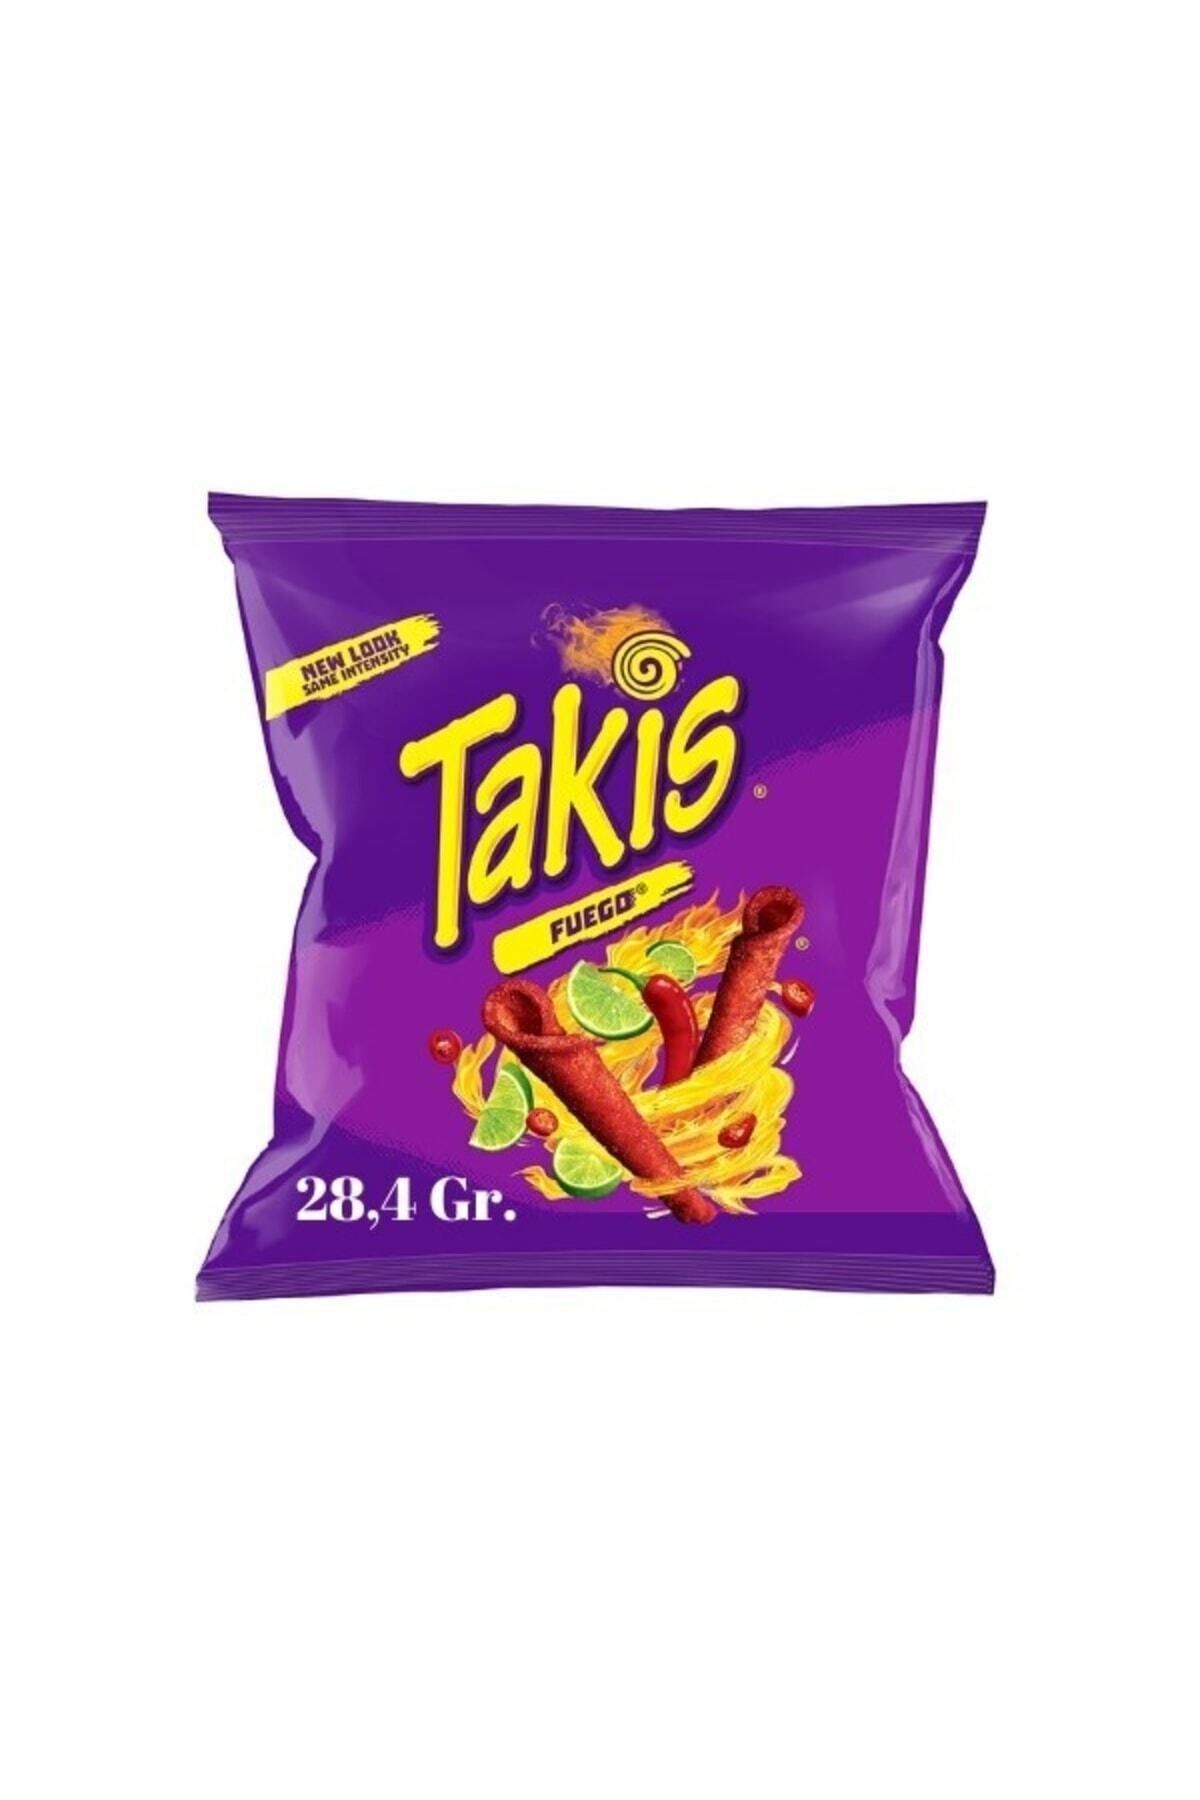 Takis Fuego Hot Chili Pepper & Lime Tortilla Chips 28,4 Gr.